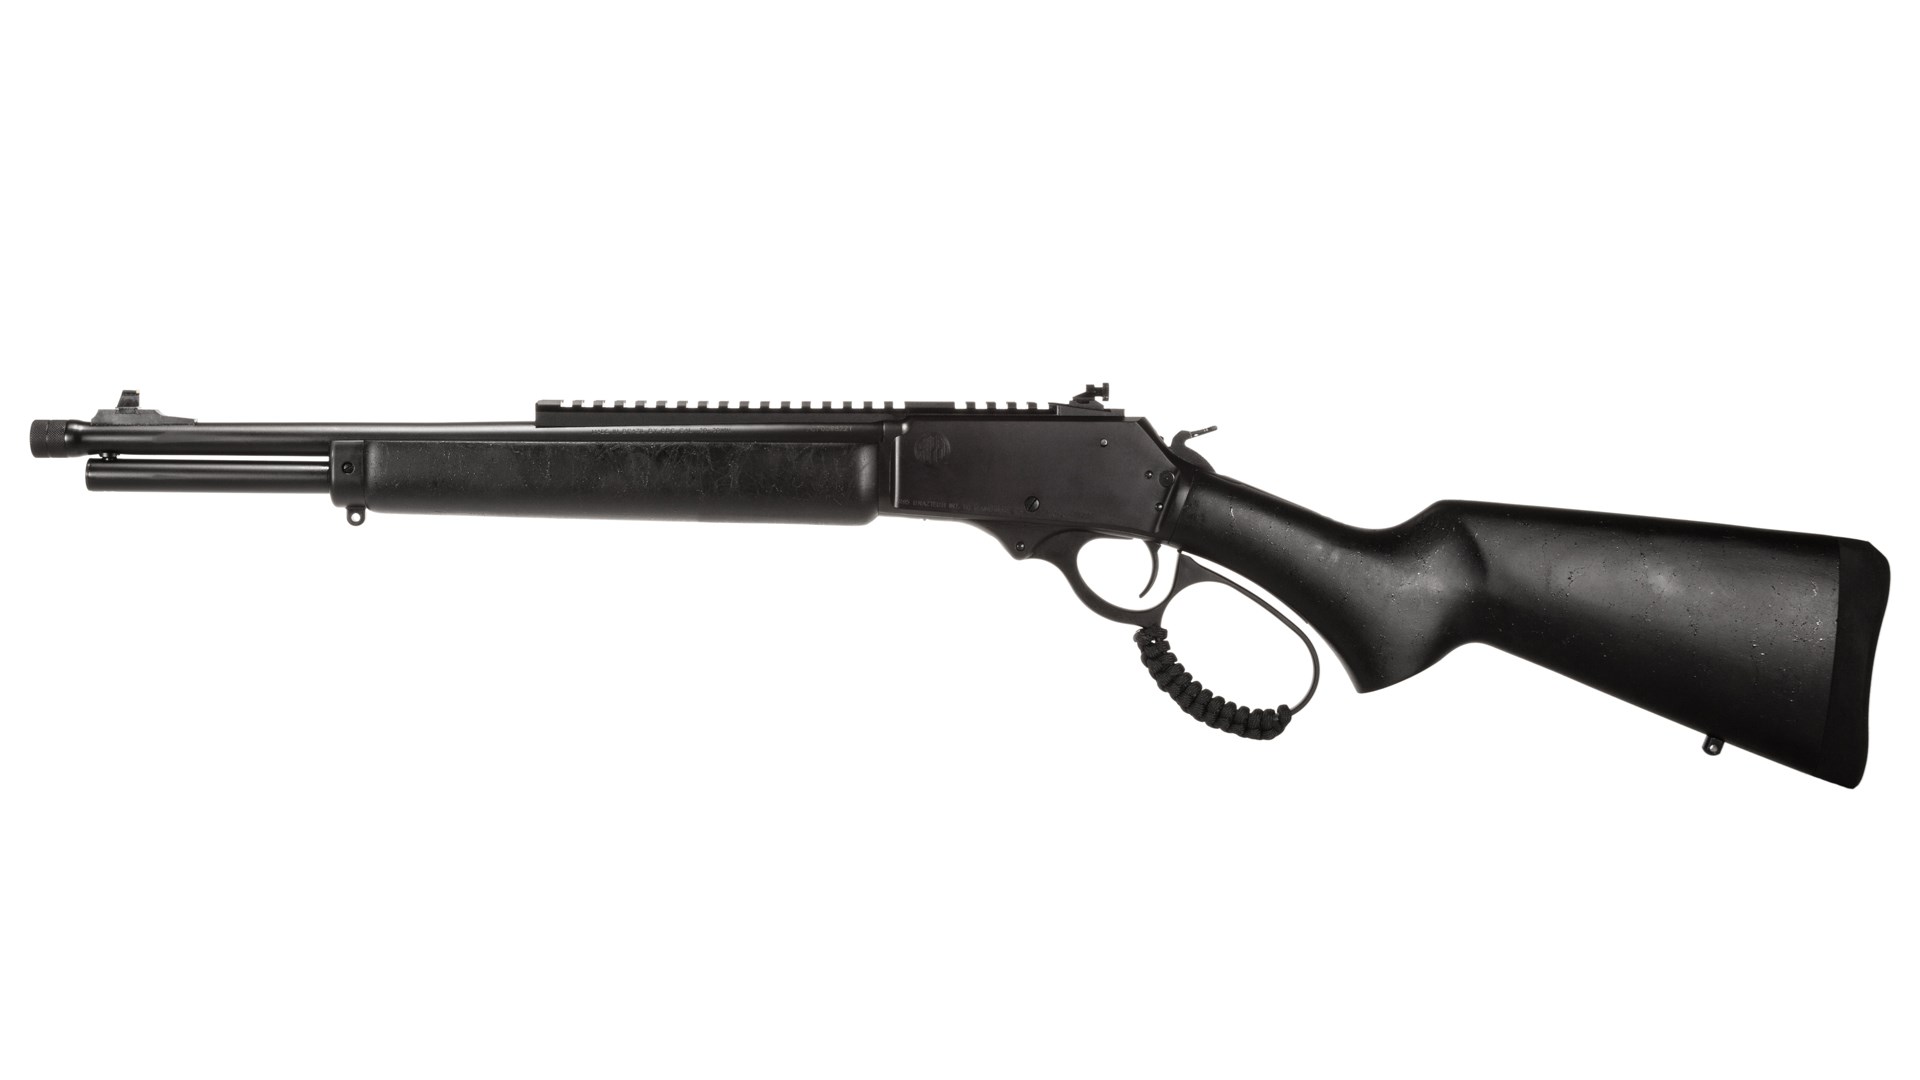 Left side of the Rossi R95 Triple Black rifle.